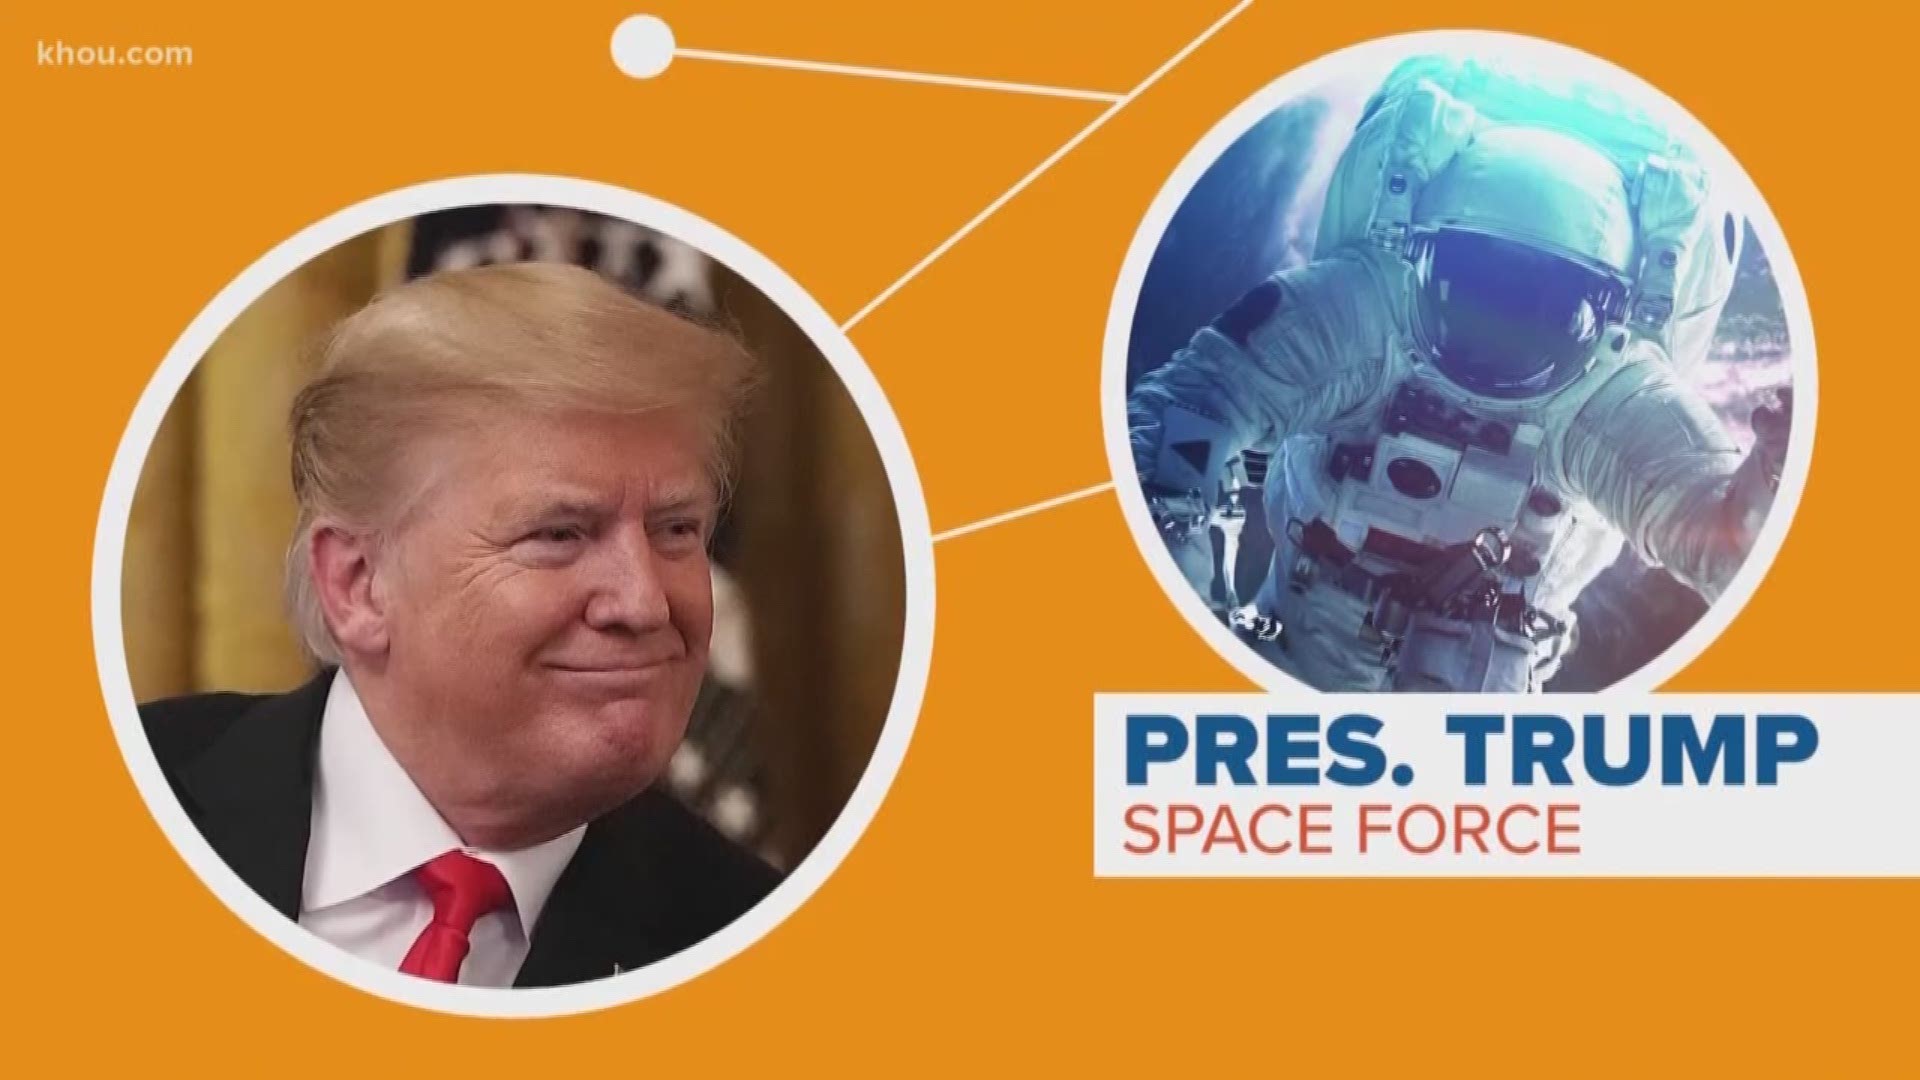 Vice President Mike Pence calls it the next chapter of the military. The U.S. Space Force is preparing for launch. Our Marcelino Benito connects the dots on the new military branch.